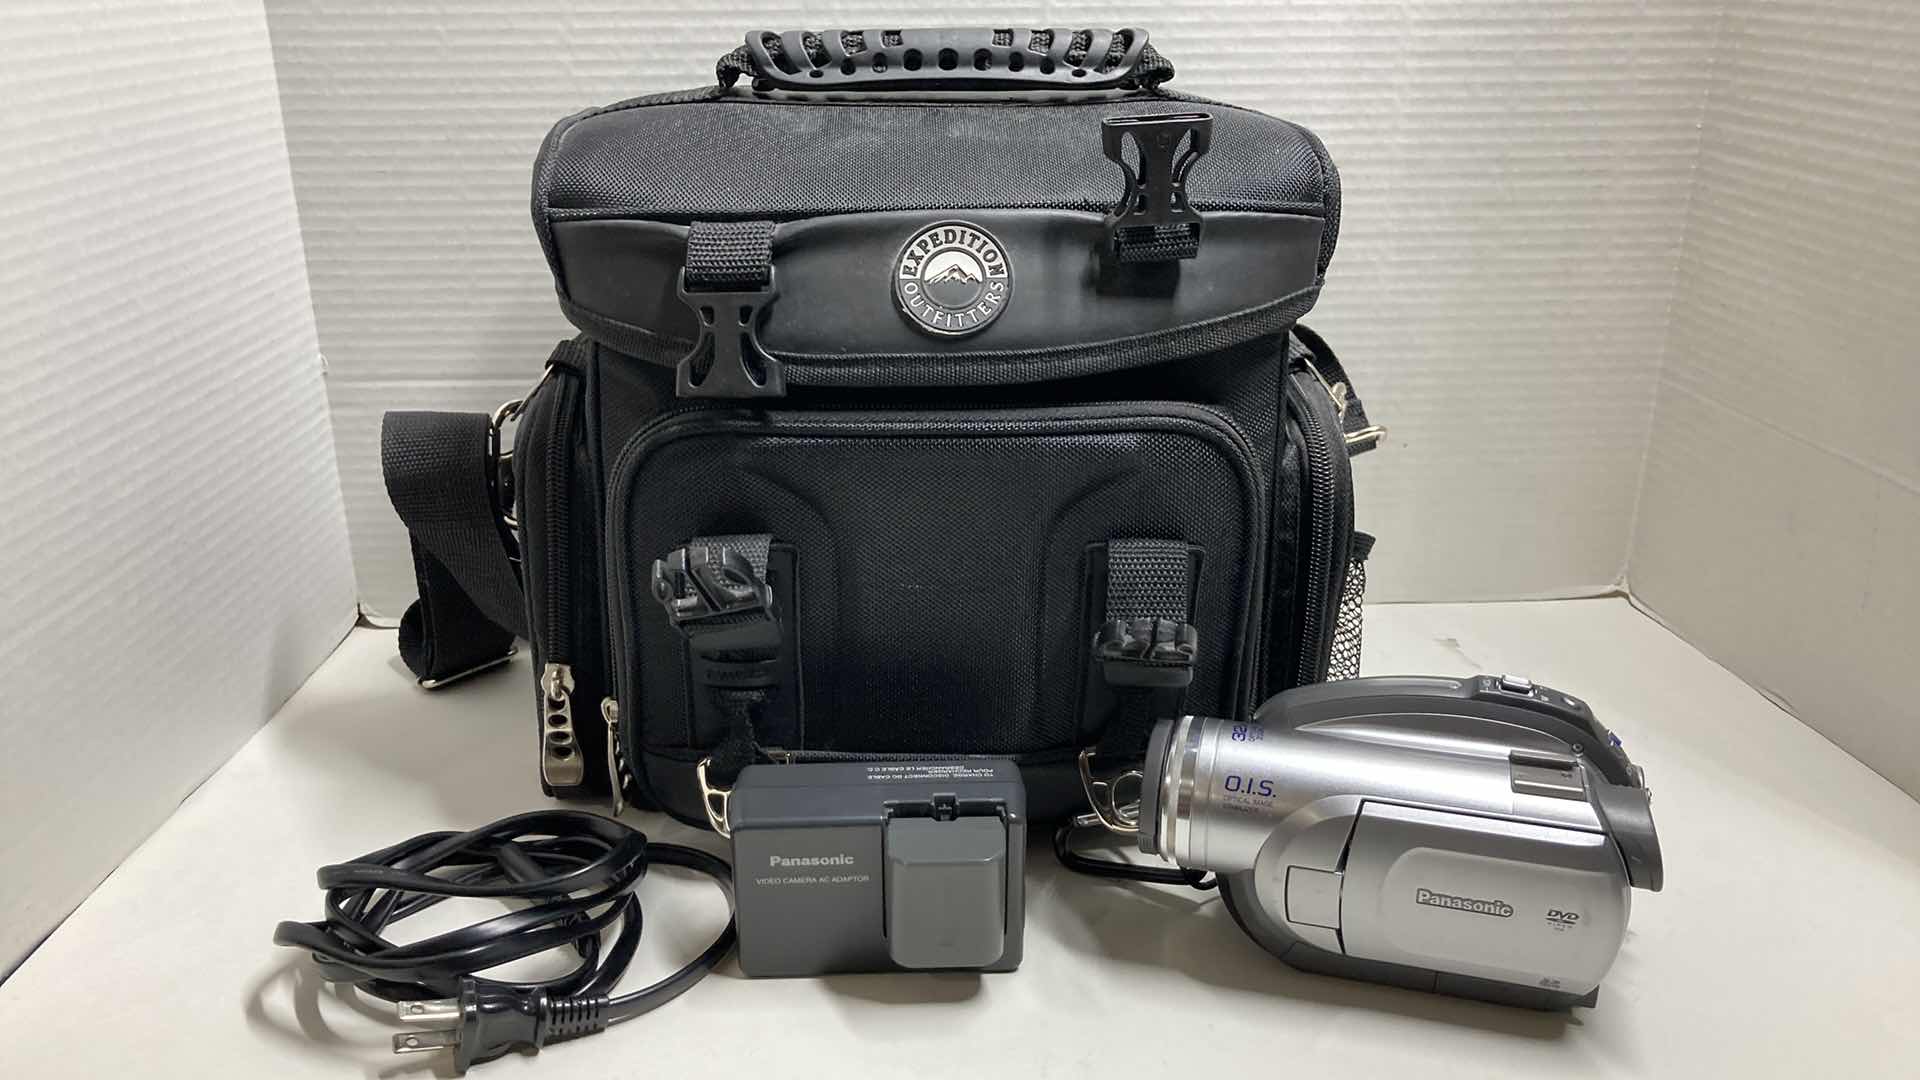 Photo 2 of PANASONIC DVD VIDEO CAMERA MODEL VDR-D220 & CANON POWERSHOT DIGITAL CAMERA MODEL SD750 W CHARGERS, BATTERIES & EXPEDITION OUTFITTERS CAMERA BAG